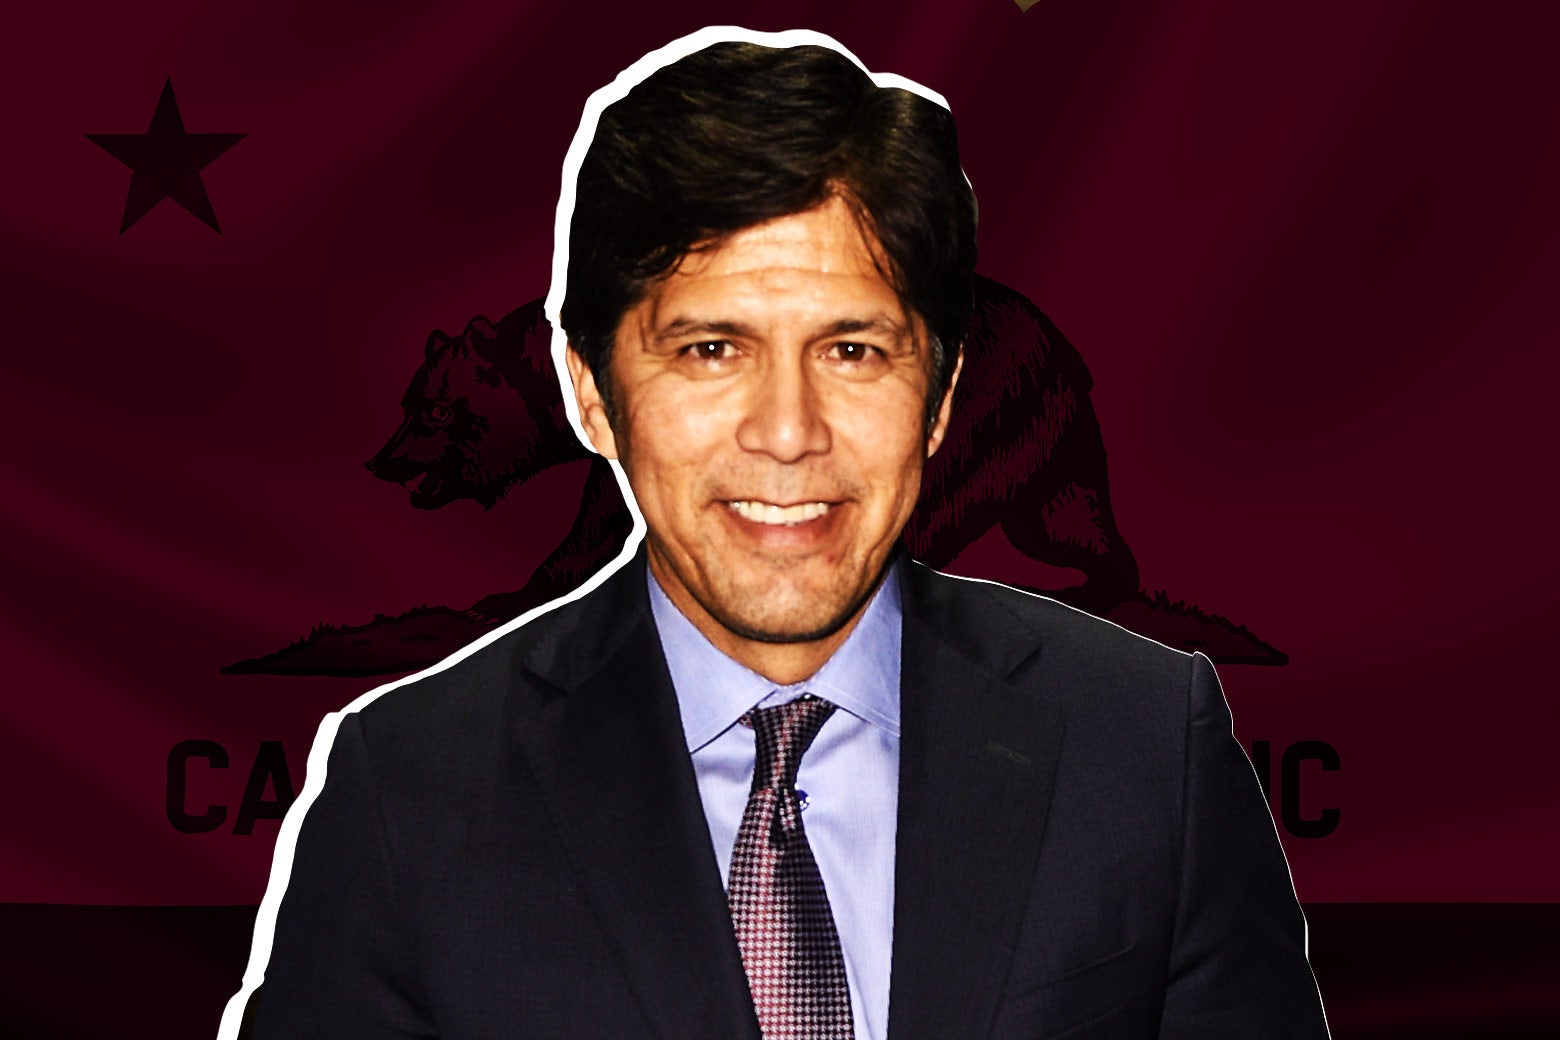 Kevin de León against the background of the California flag.